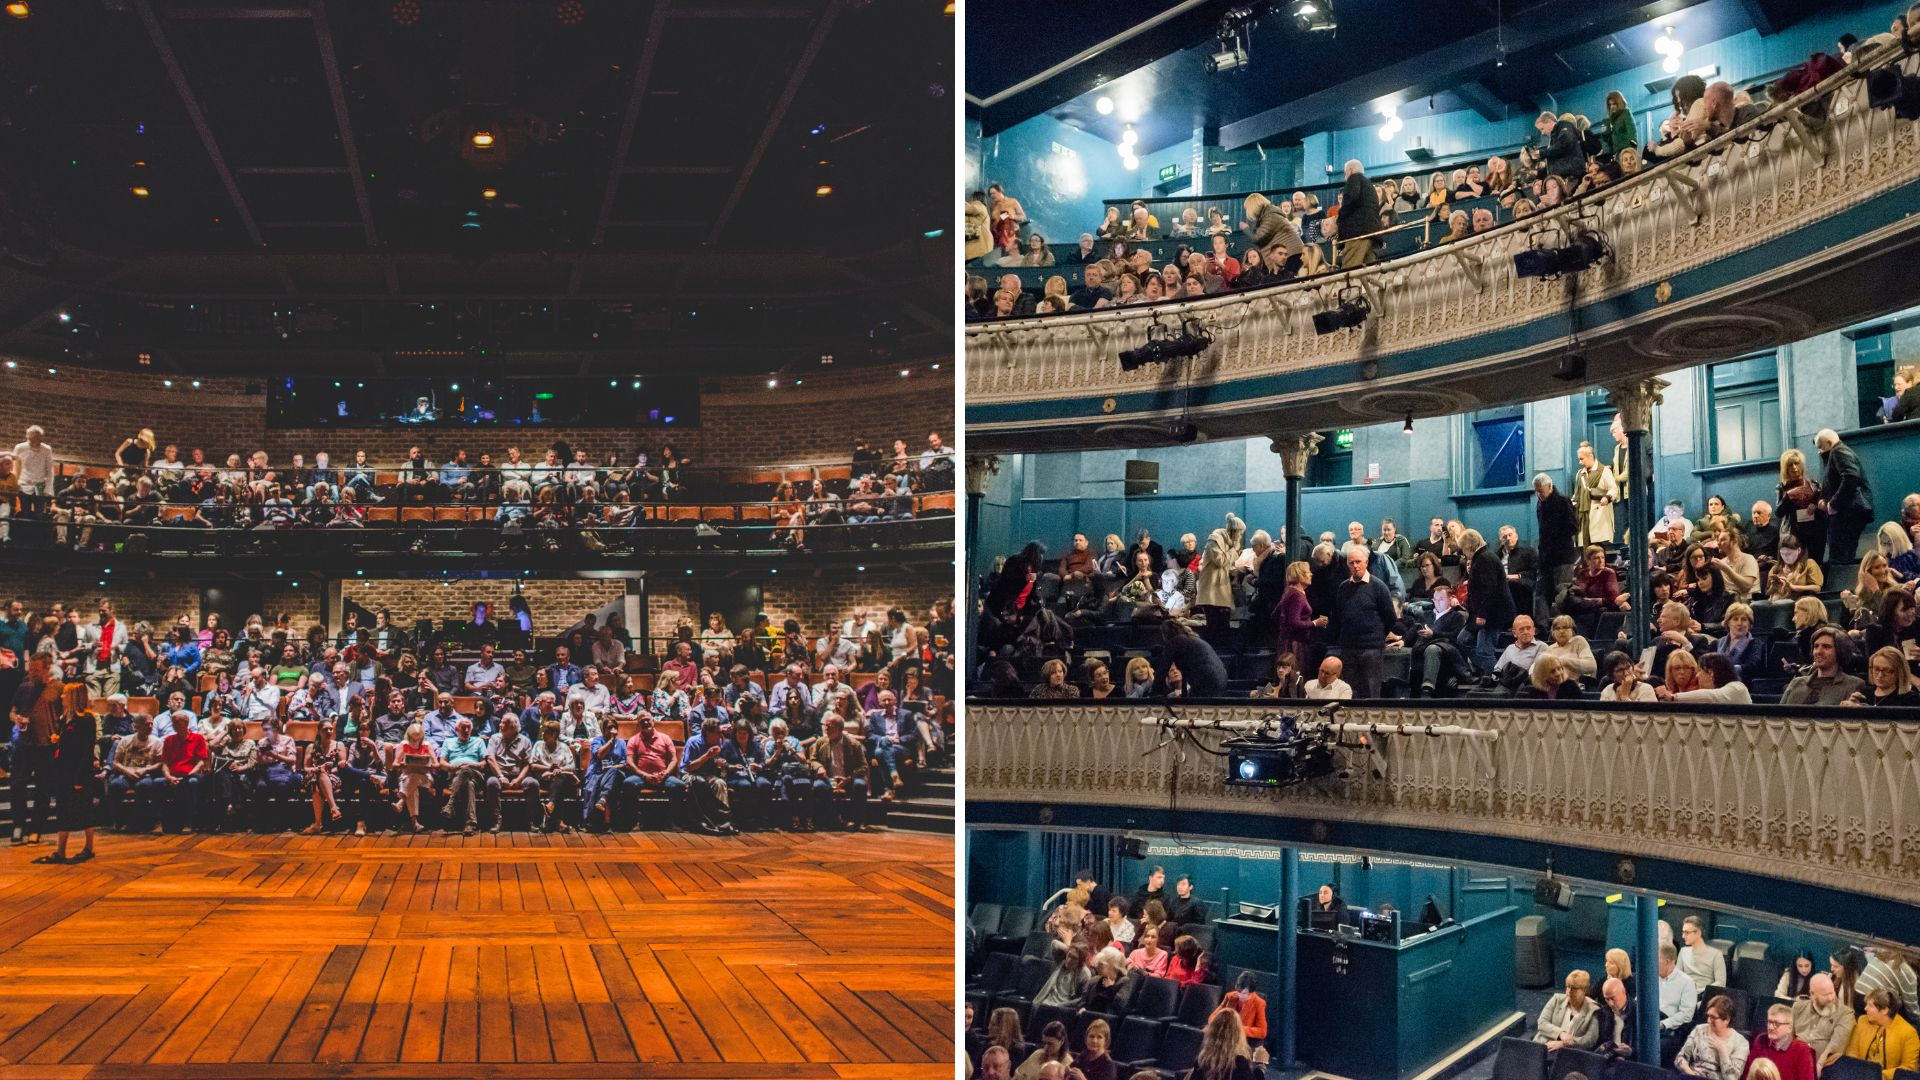 Photographs of inside the auditorium of the Everyman and Playhouse by Emma Hillier